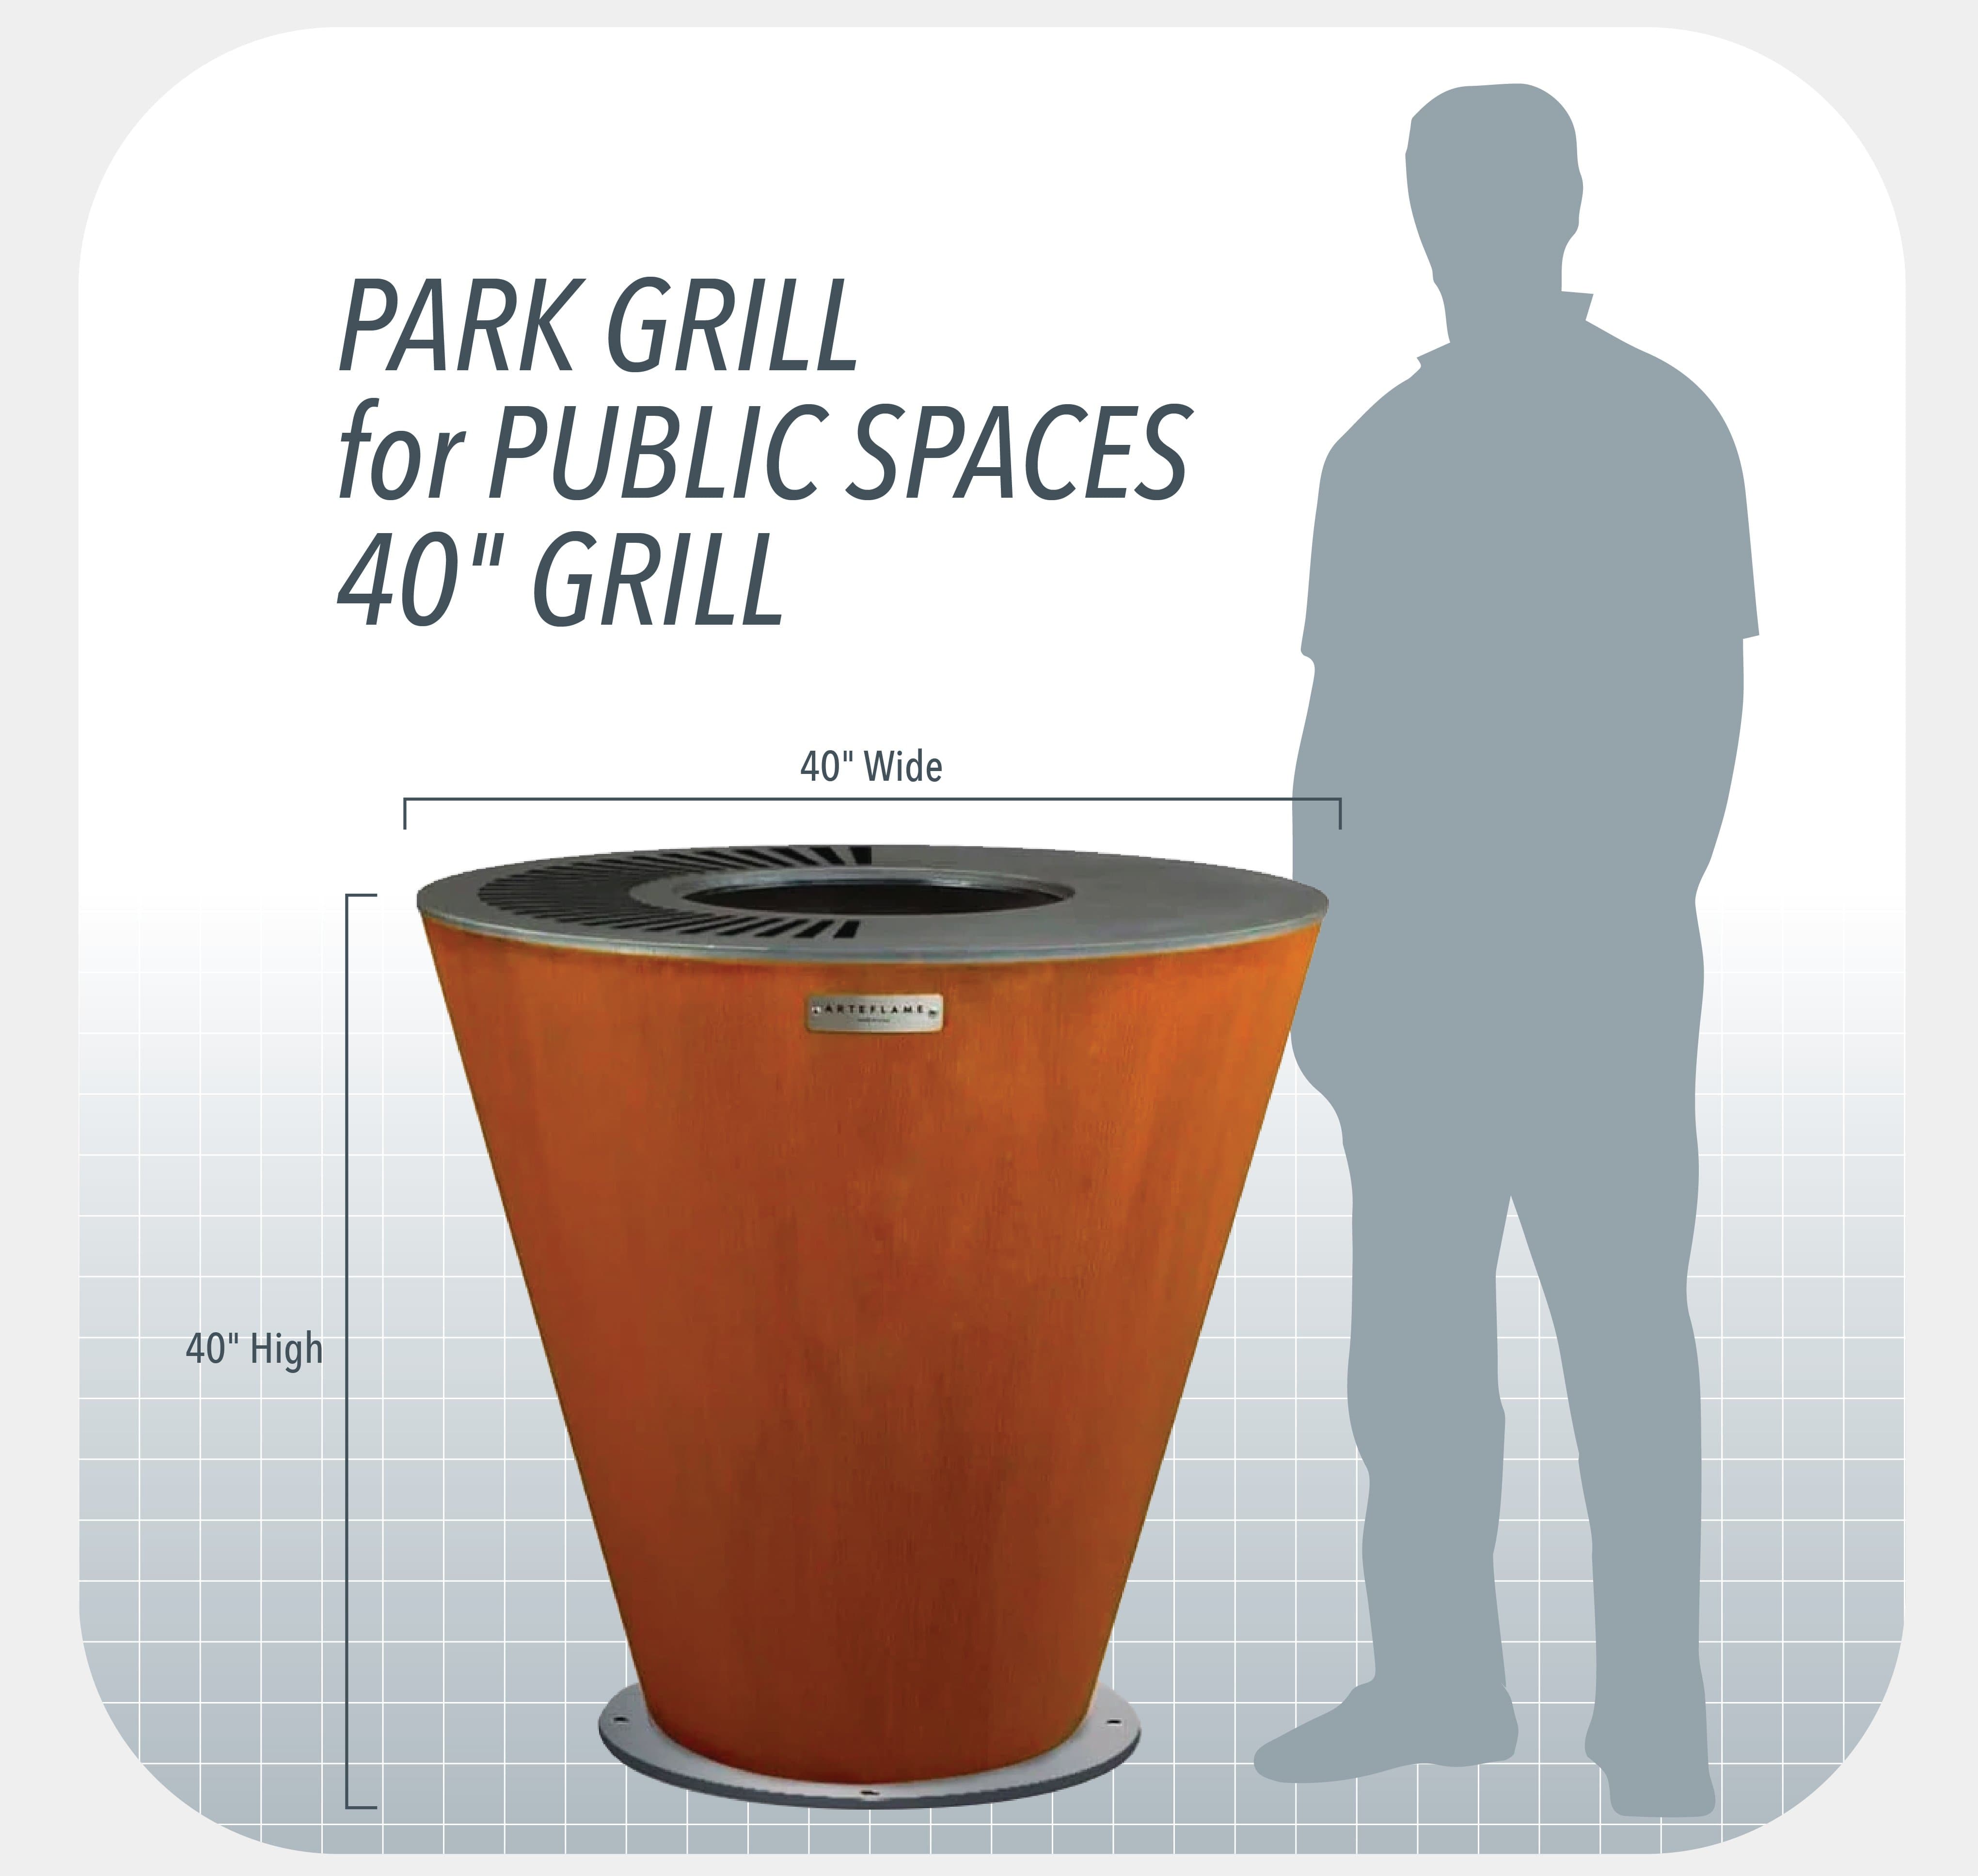 park grill height with man next to it